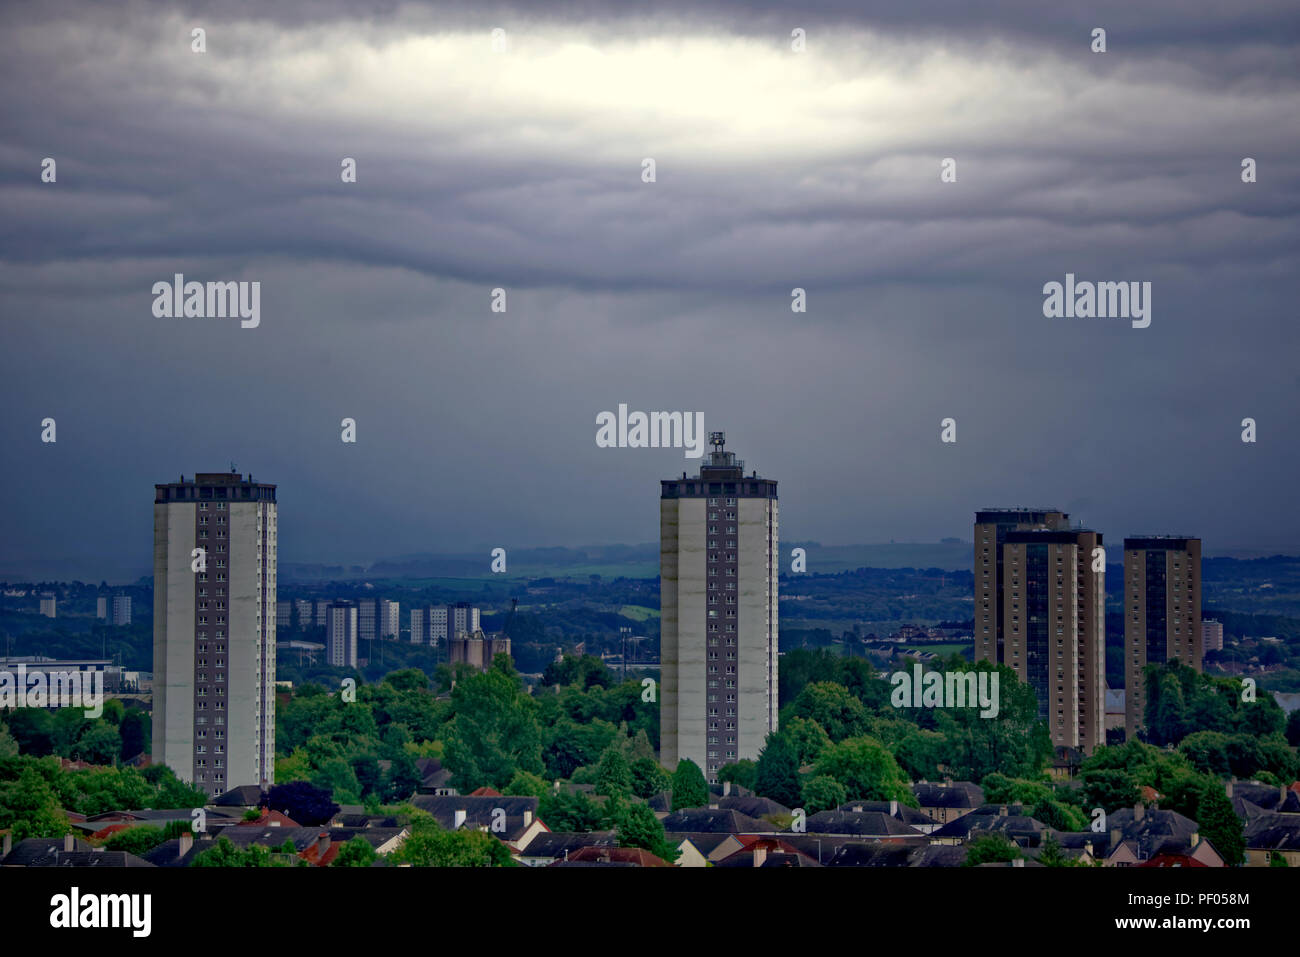 Glasgow, Scotland, UK. 18th August, 2018. UK Weather:Black and gray sky as storm Ernesto is due over the town as overnight rain is forecast through the day.No sky colour with  any sense of perspective comes from the city’s buildings as the sun fails to appear overhead. The north  towers in Scotstoun are the foreground of the towers south of the Clyde river stretching into the distance towards the hills outside the city.  Gerard Ferry/Alamy news Credit: gerard ferry/Alamy Live News Stock Photo